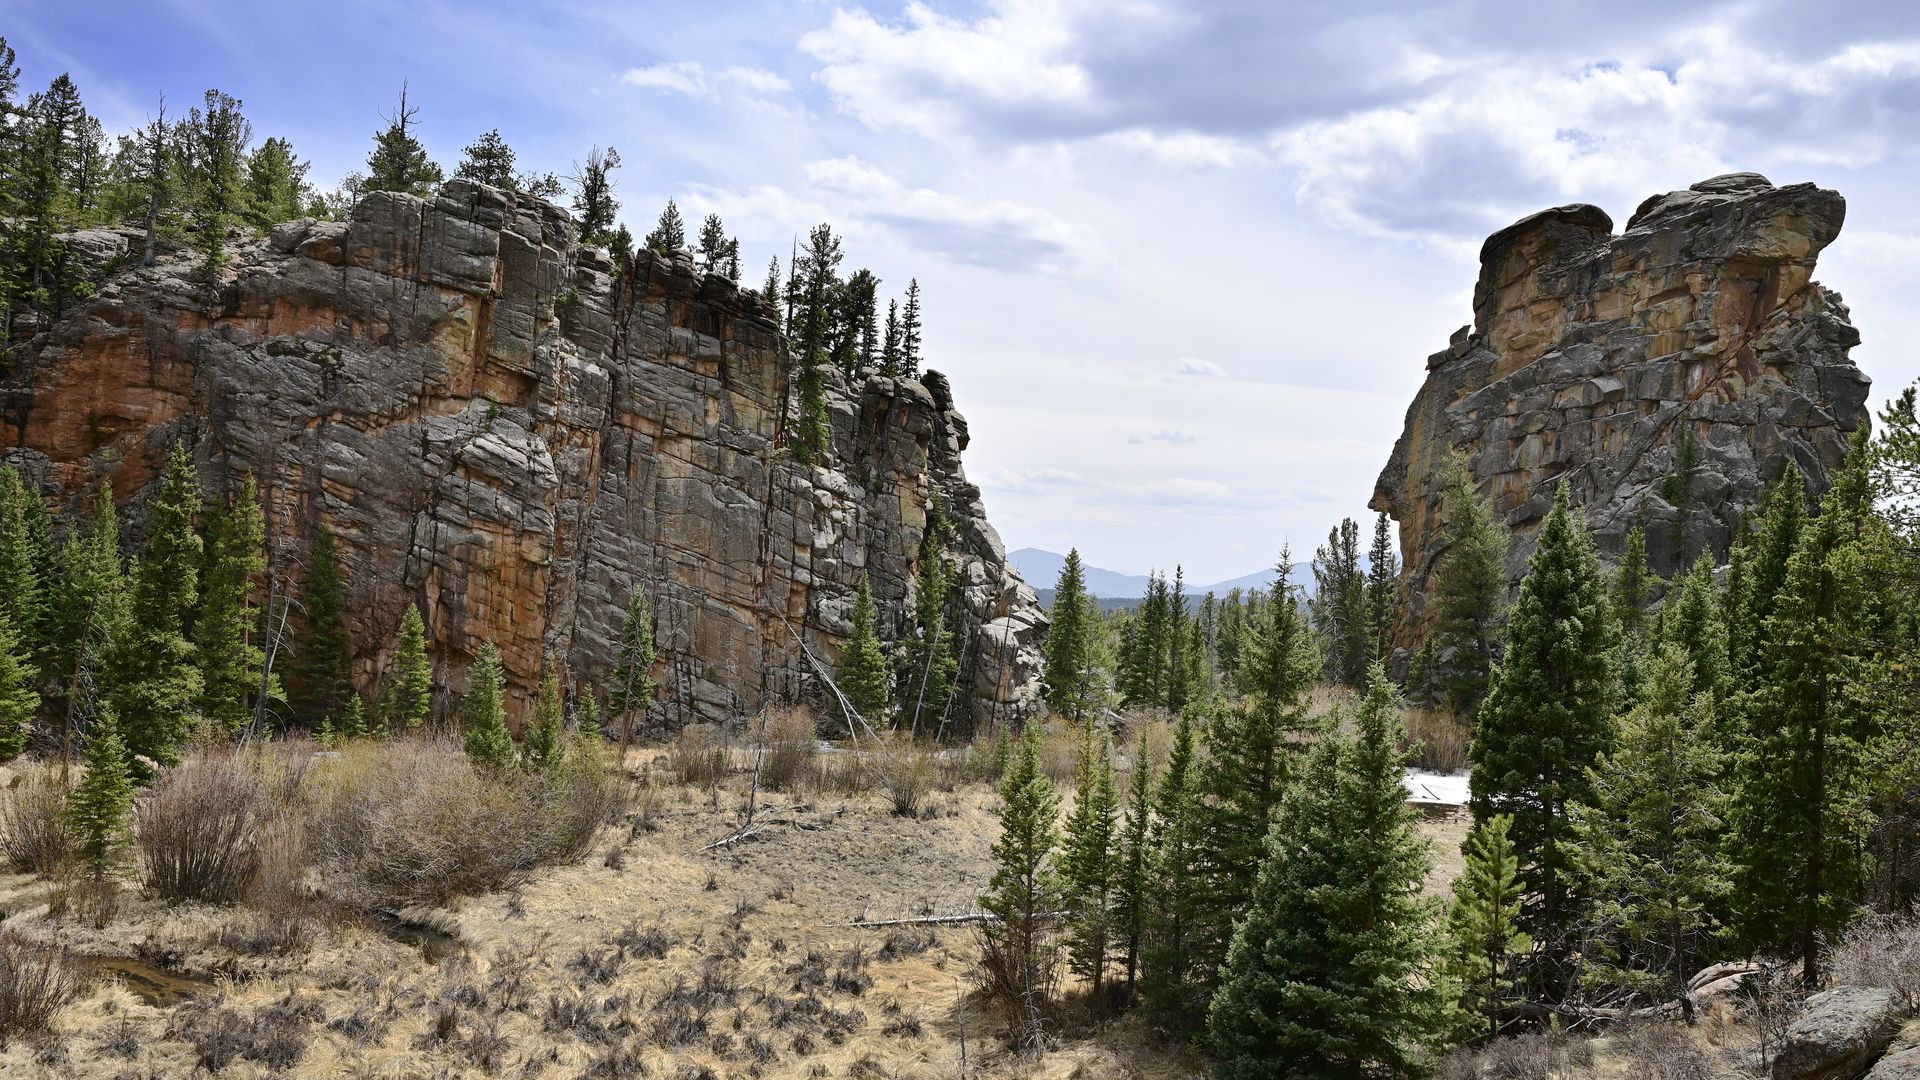 Chimney Rock, right, photographed at Staunton State Park in Pine. Photo: Hyoung Chang/Denver Post via Getty Images